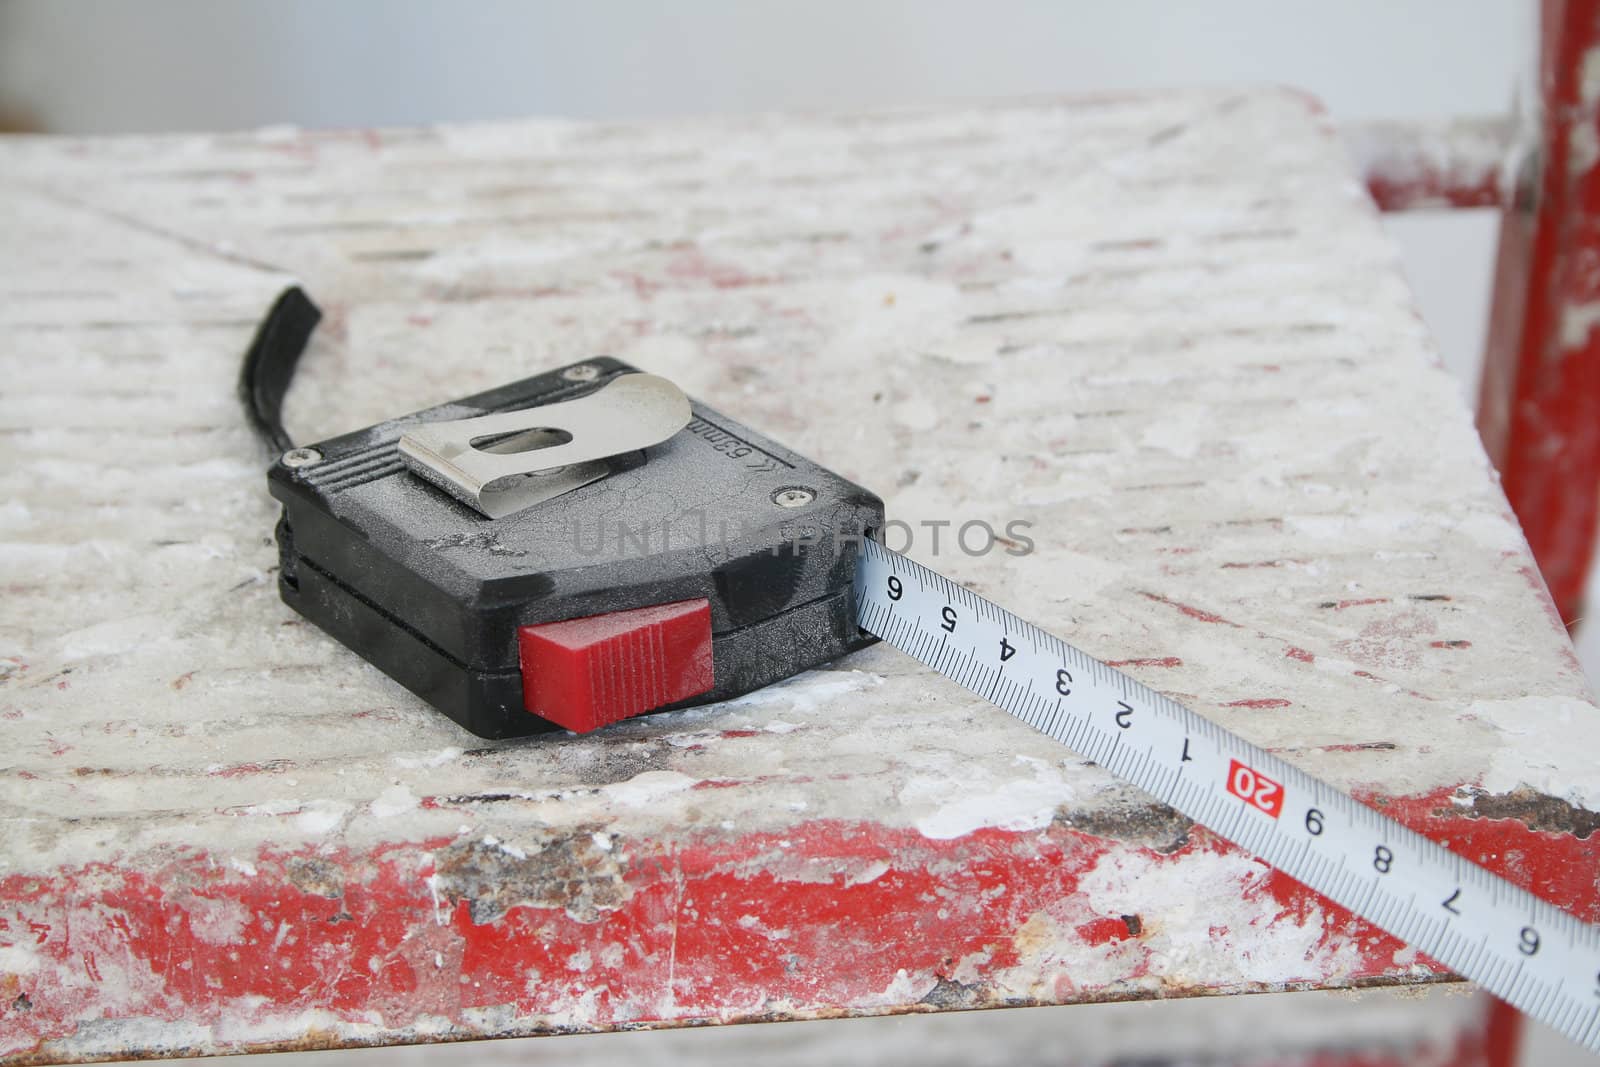 The black tape measure lays on a step-ladder